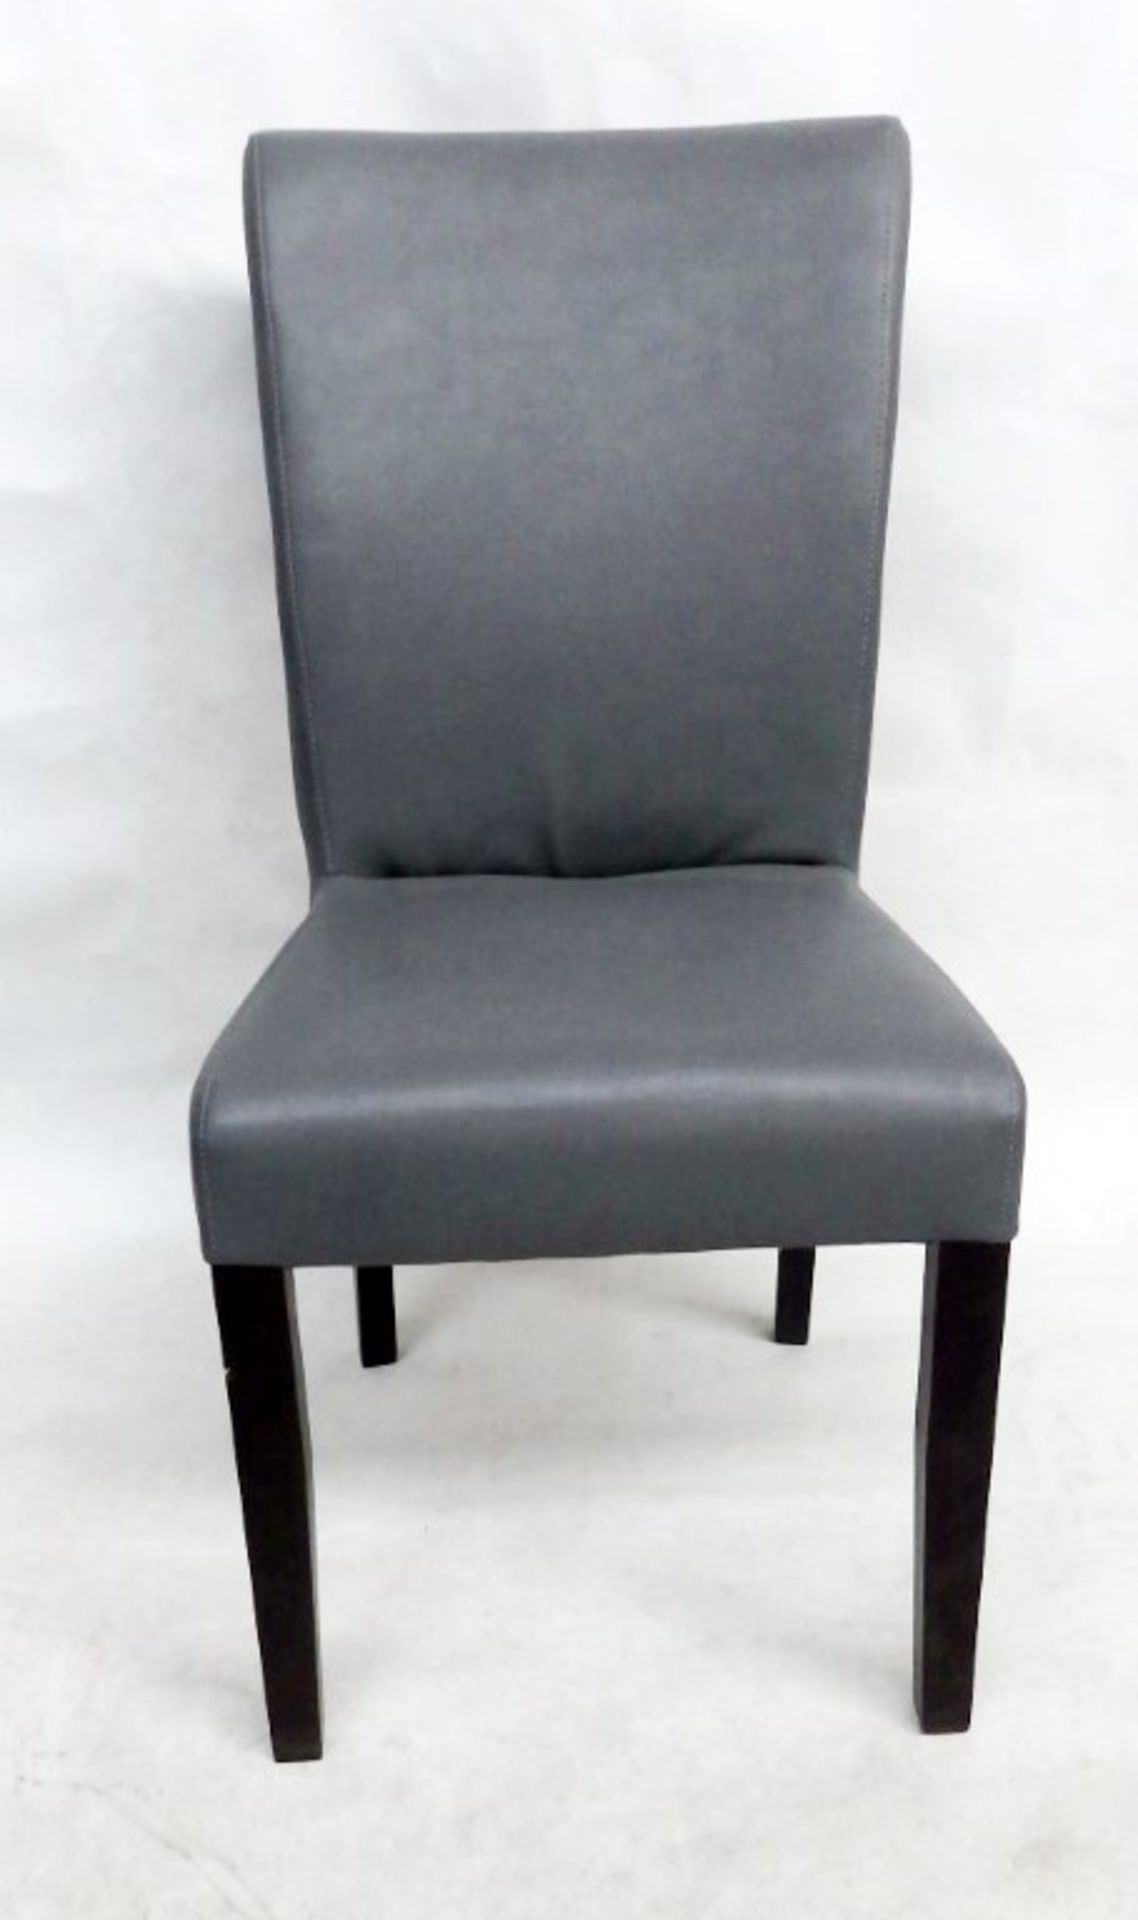 1 x Soft Grey Leather Chair - Handcrafted & Upholstered By British Craftsmen - Dimensions: W44 x D47 - Image 5 of 12